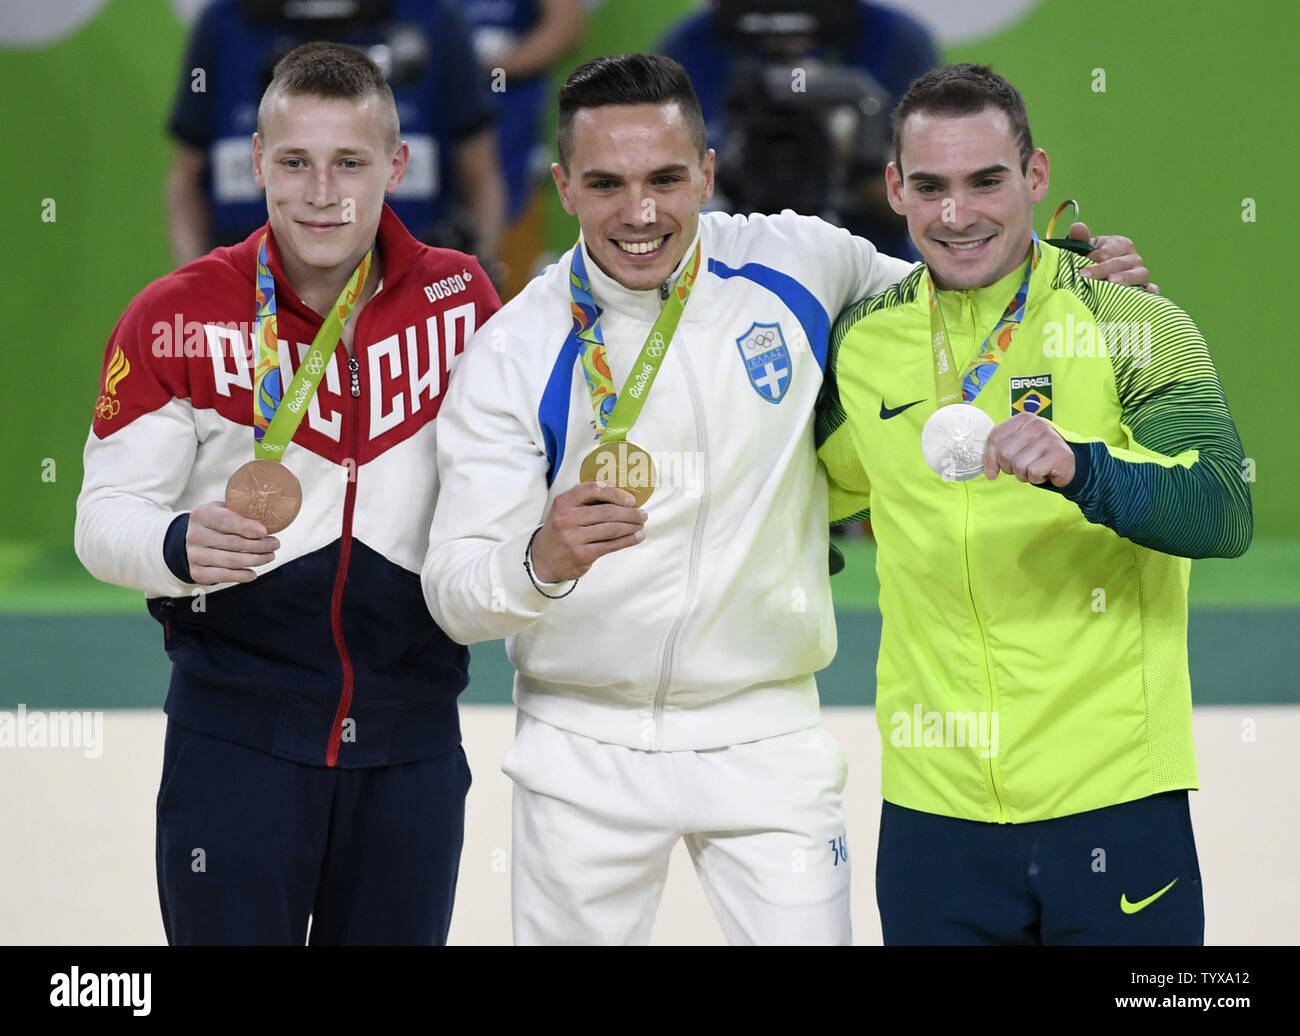 Greece's Eleftherios Petrounias (C) displays his Gold Medal along with Brazil's Arthur Zanetti (R) who won the Silver Medal and Russia's Denis Abliazin, who won the Bronze in the Men's Rings Final at the 2016 Rio Summer Olympics in Rio de Janeiro, Brazil, August 15, 2016.       Photo by Mike Theiler/UPI Stock Photo